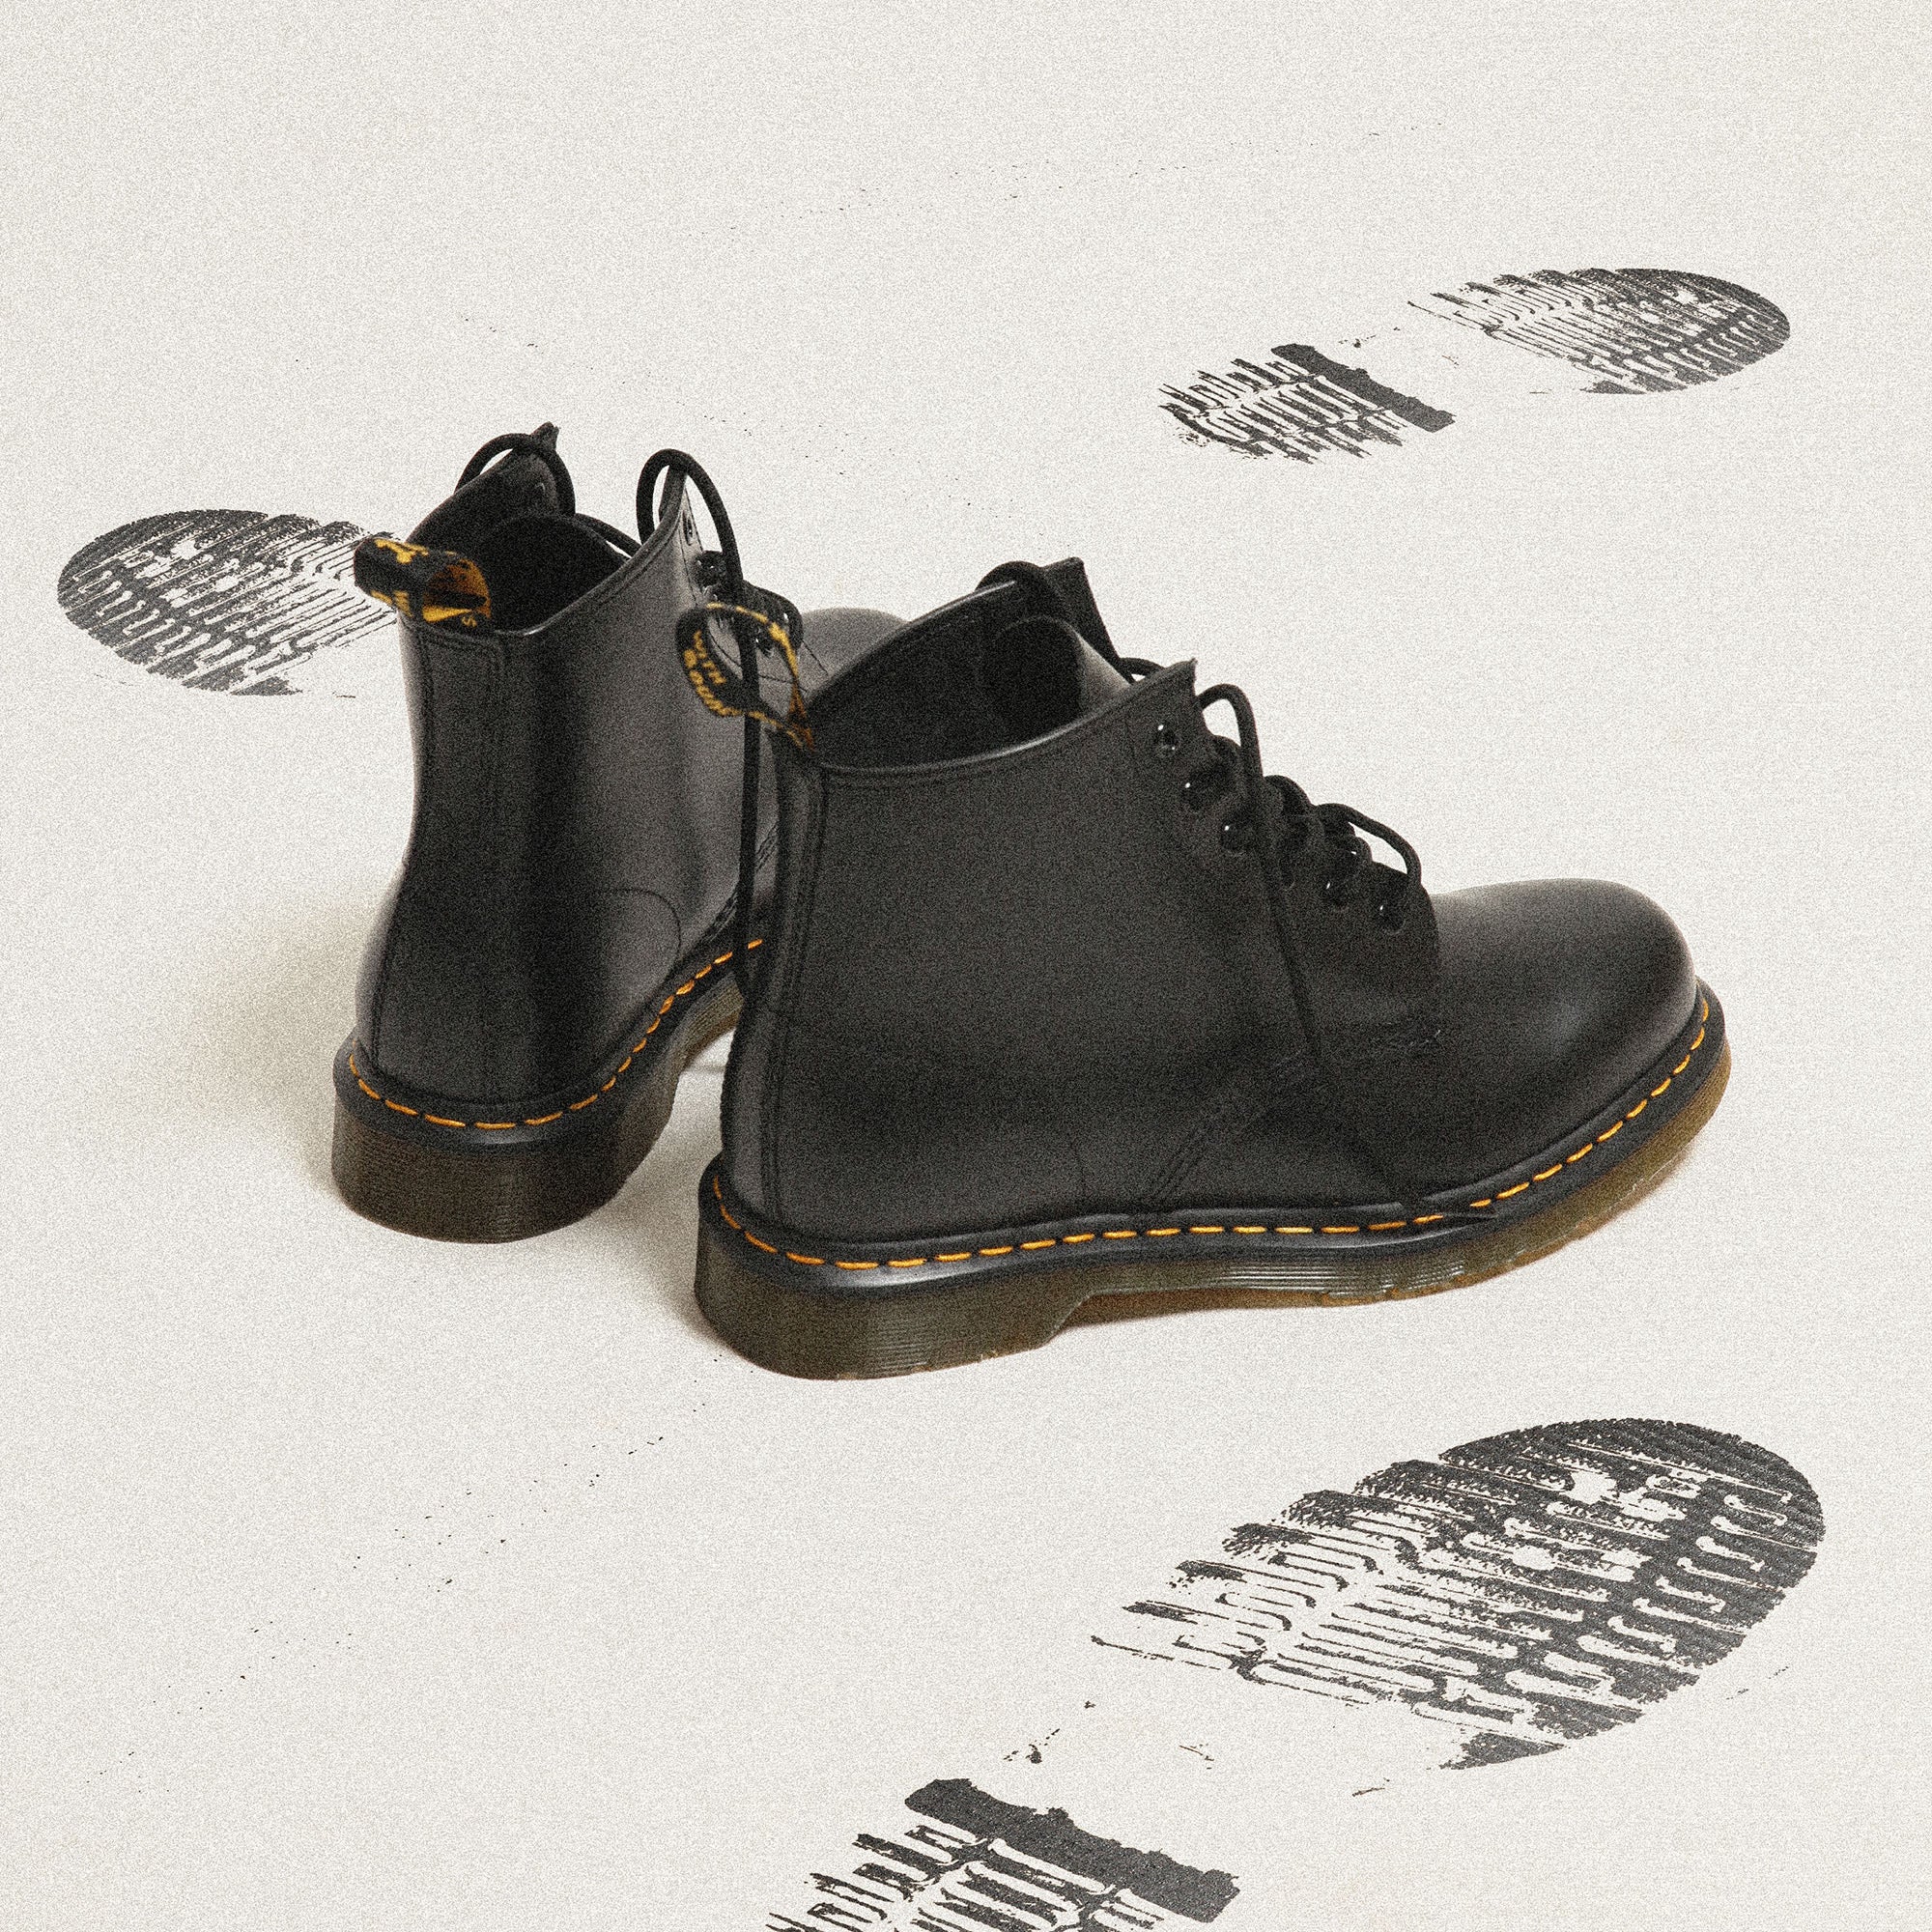 Dr. Martens - Find Yours Perfect Pair